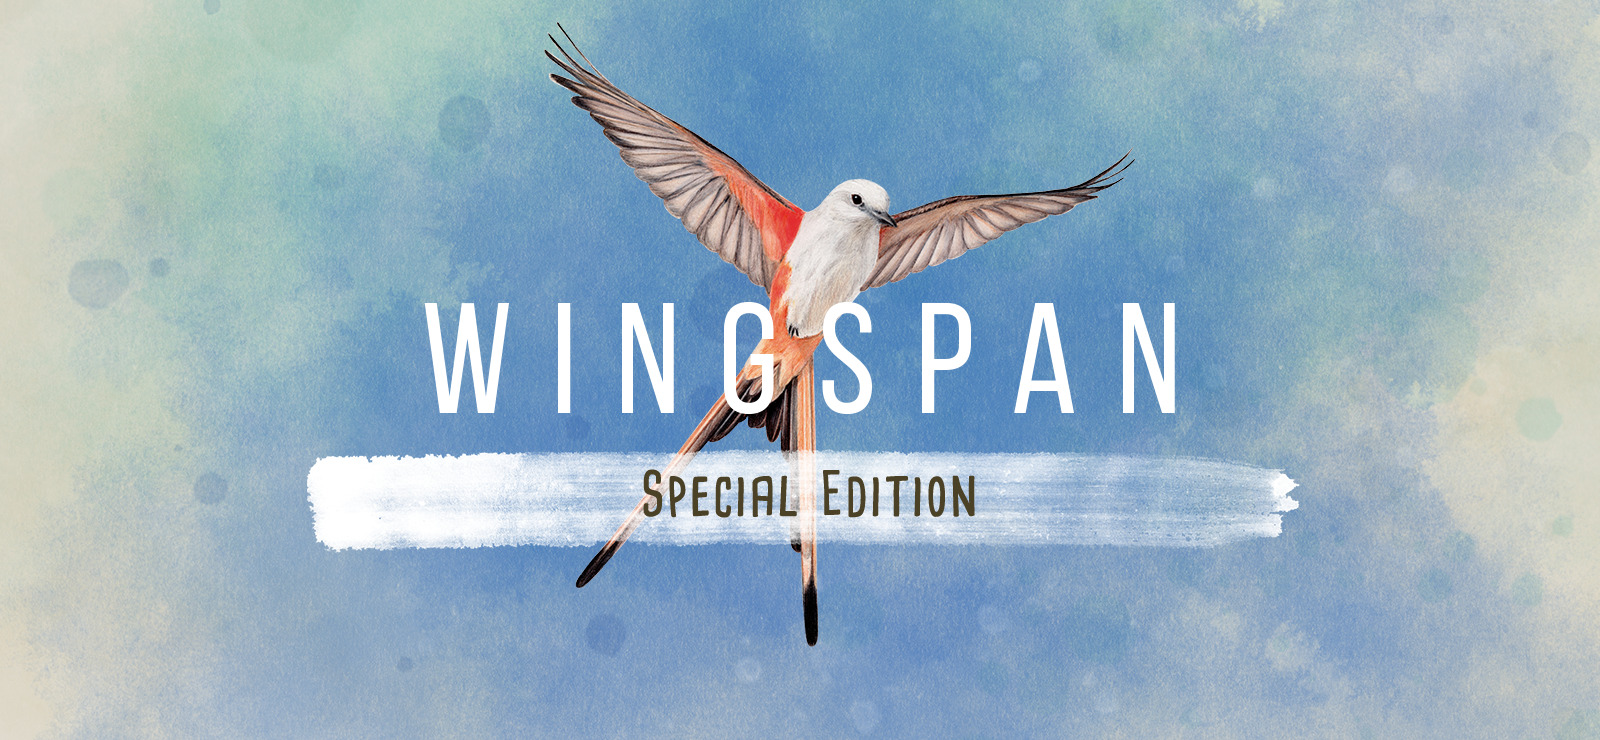 Save 70% on Wingspan Soundtrack on Steam